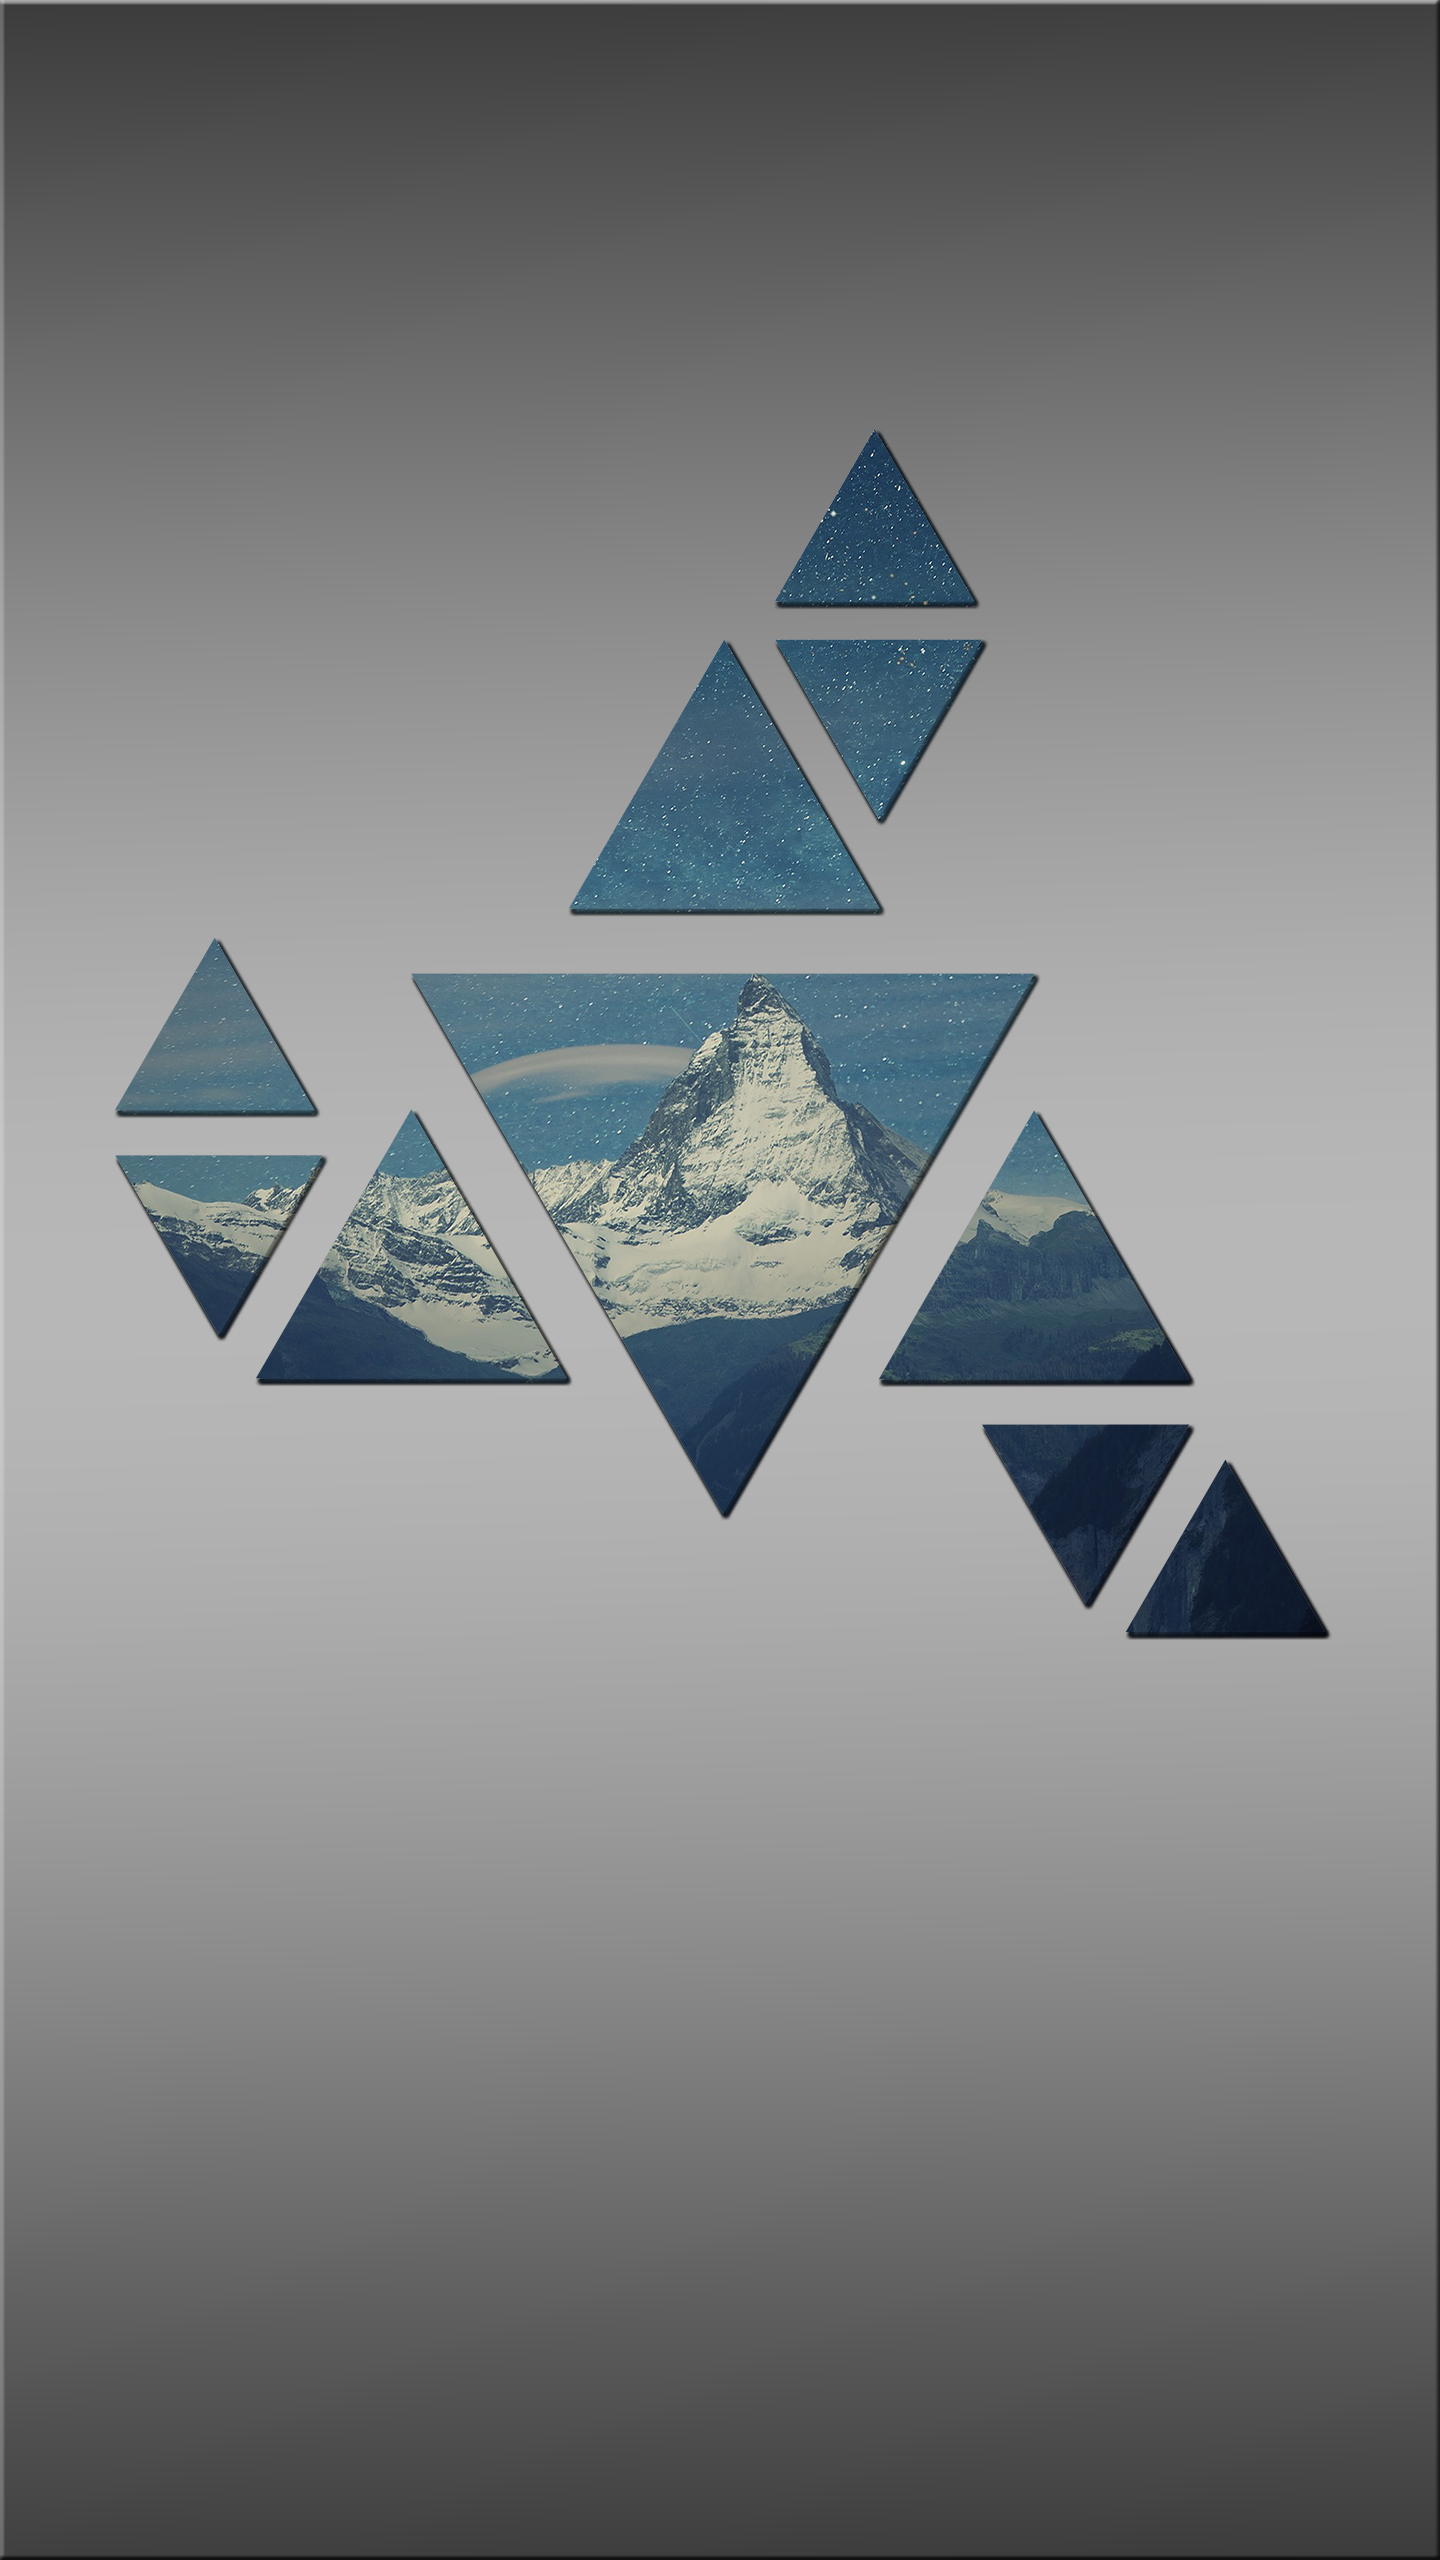 General 1440x2560 mountains portrait display simple background triangle